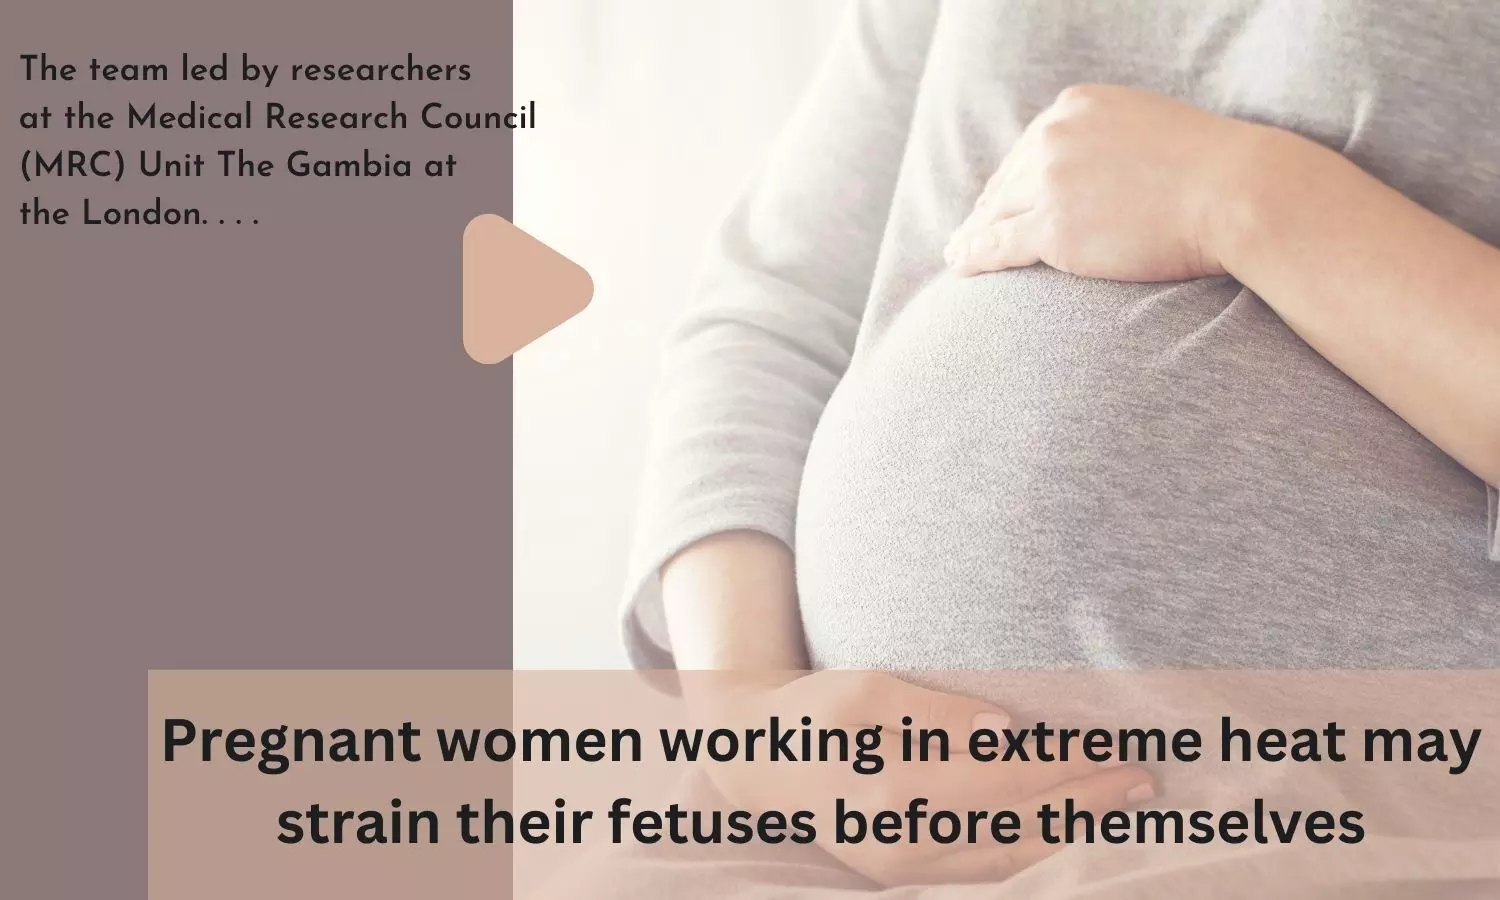 Pregnant women working in extreme heat may strain their fetuses before themselves